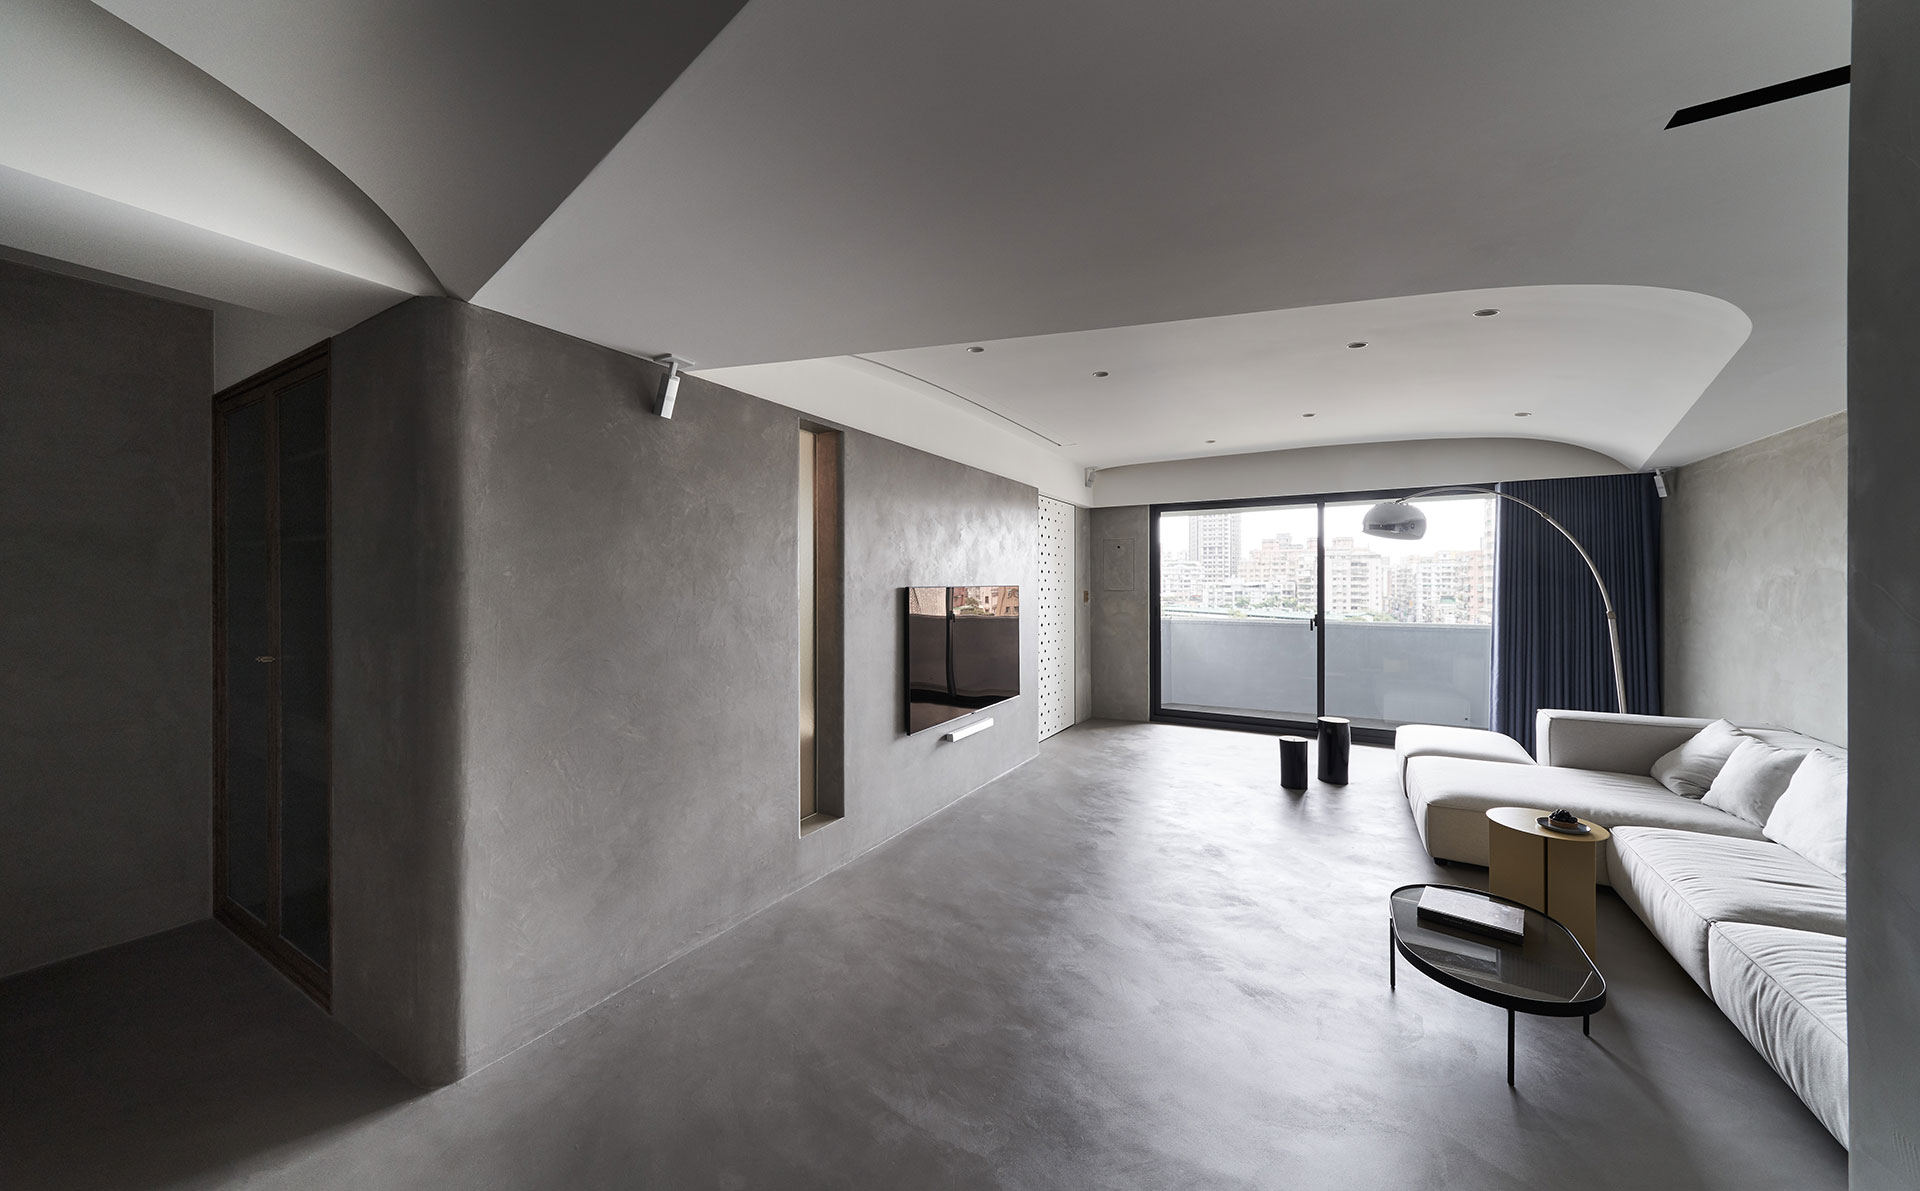 Residence C (Yonghe Chen house) by KC design studio.
Photo by Hey! Cheese.